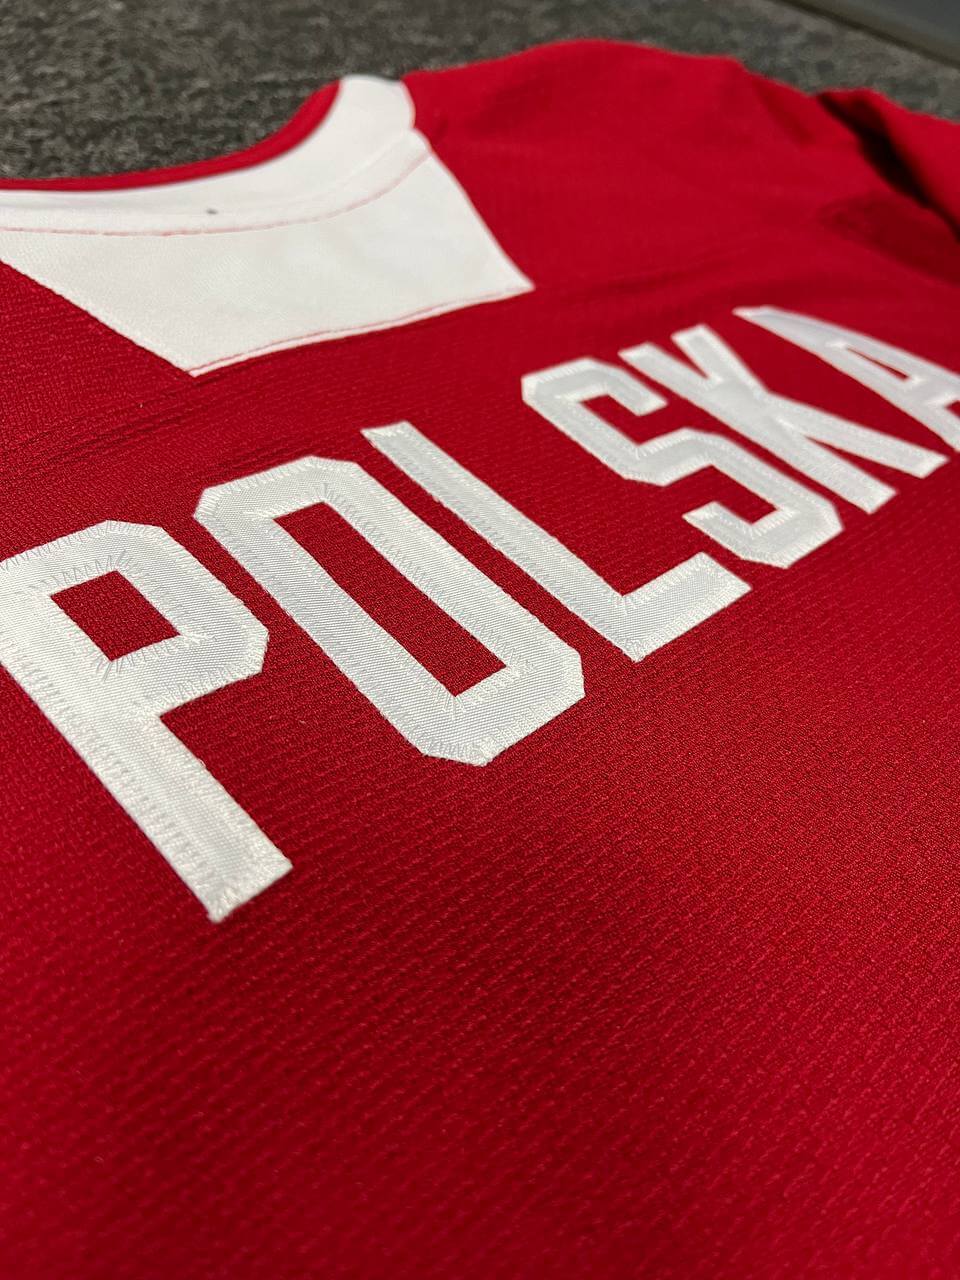 polish eagle jersey red 